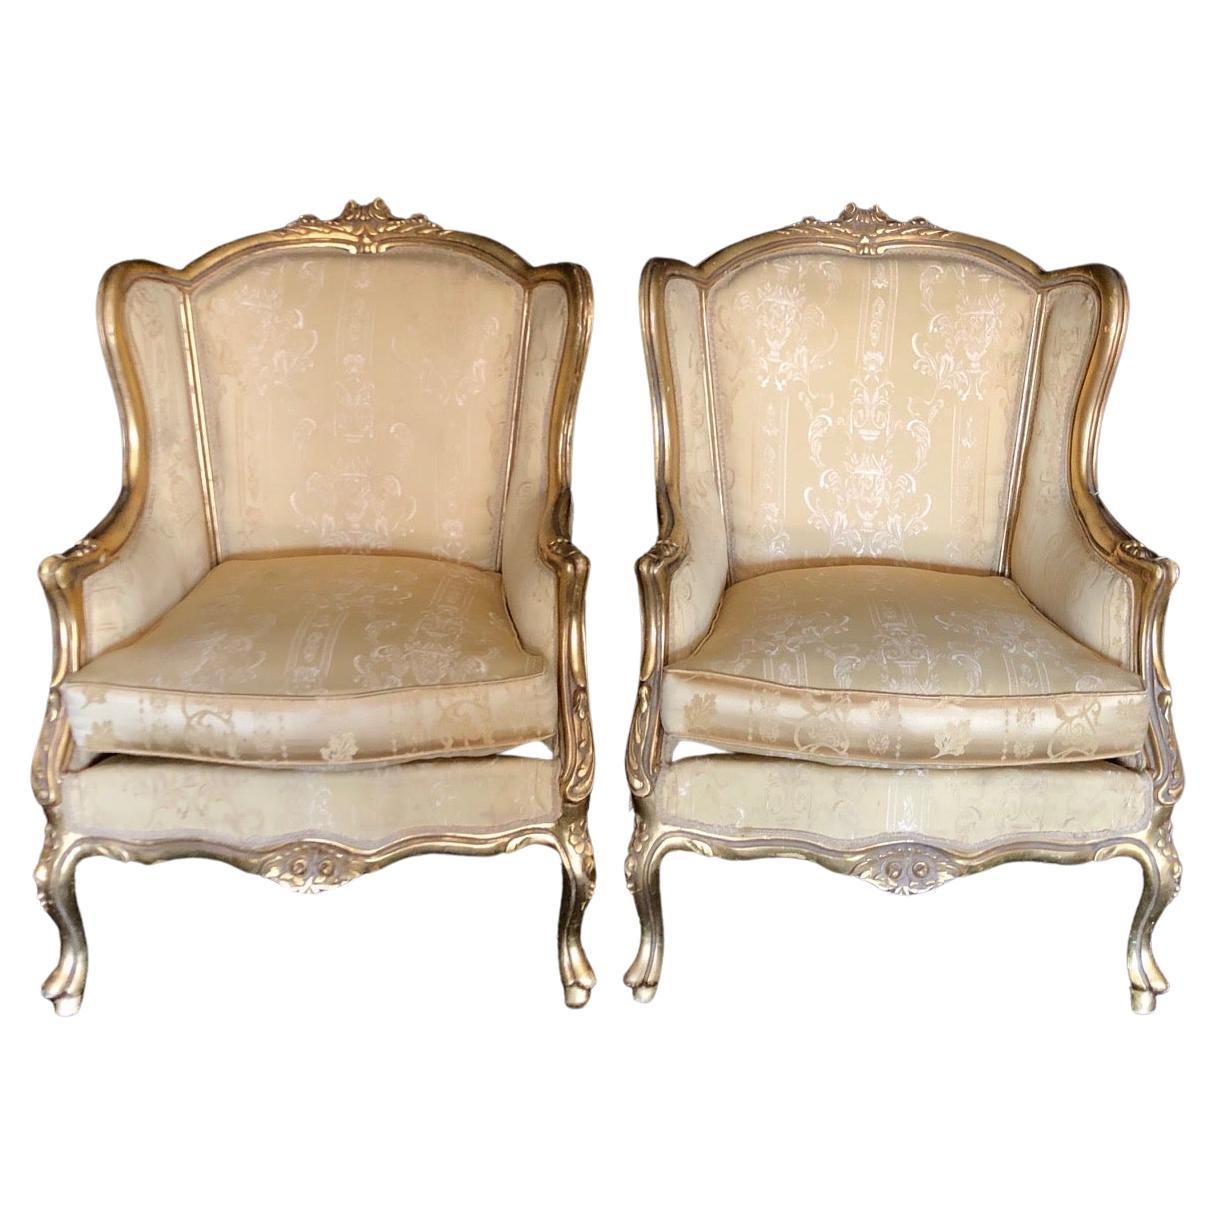 Classic Pair of Louis XV Style Giltwood Bergeres Armchairs